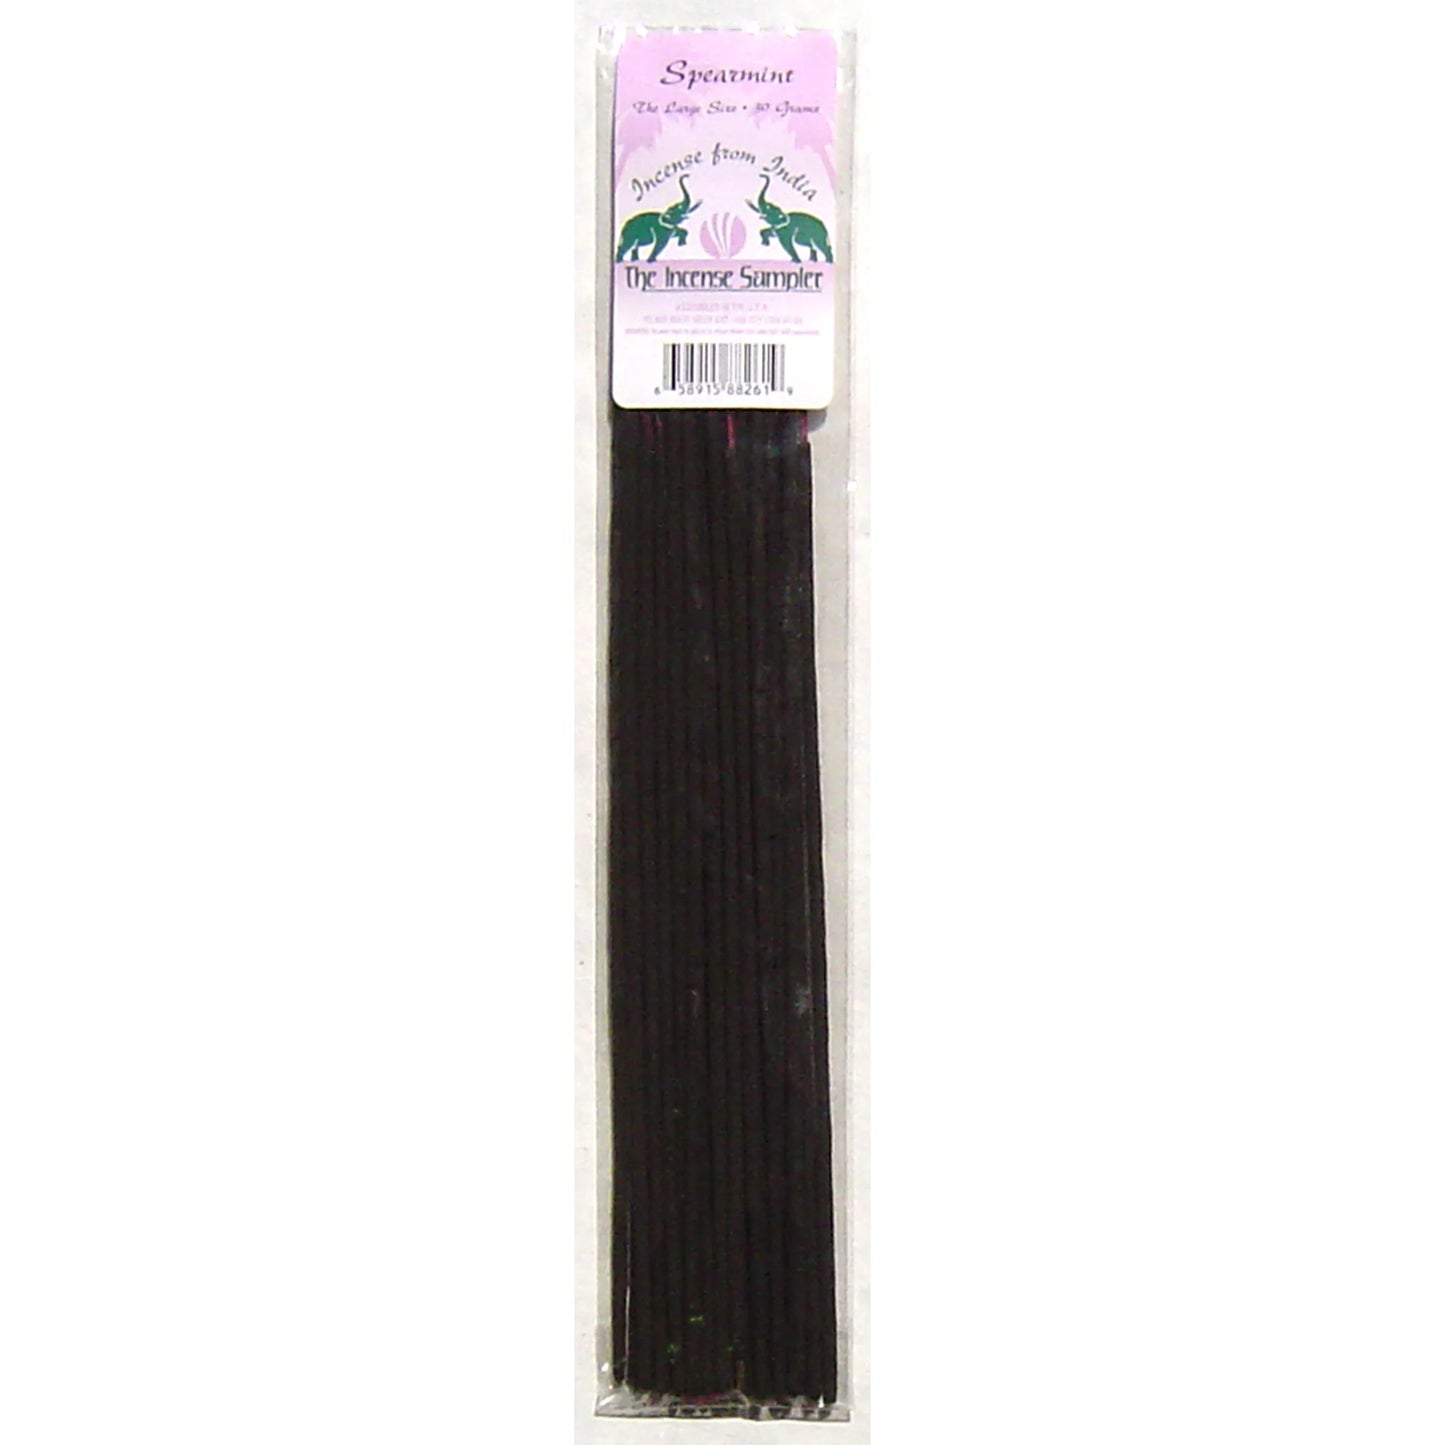 Incense From India - Spearmint